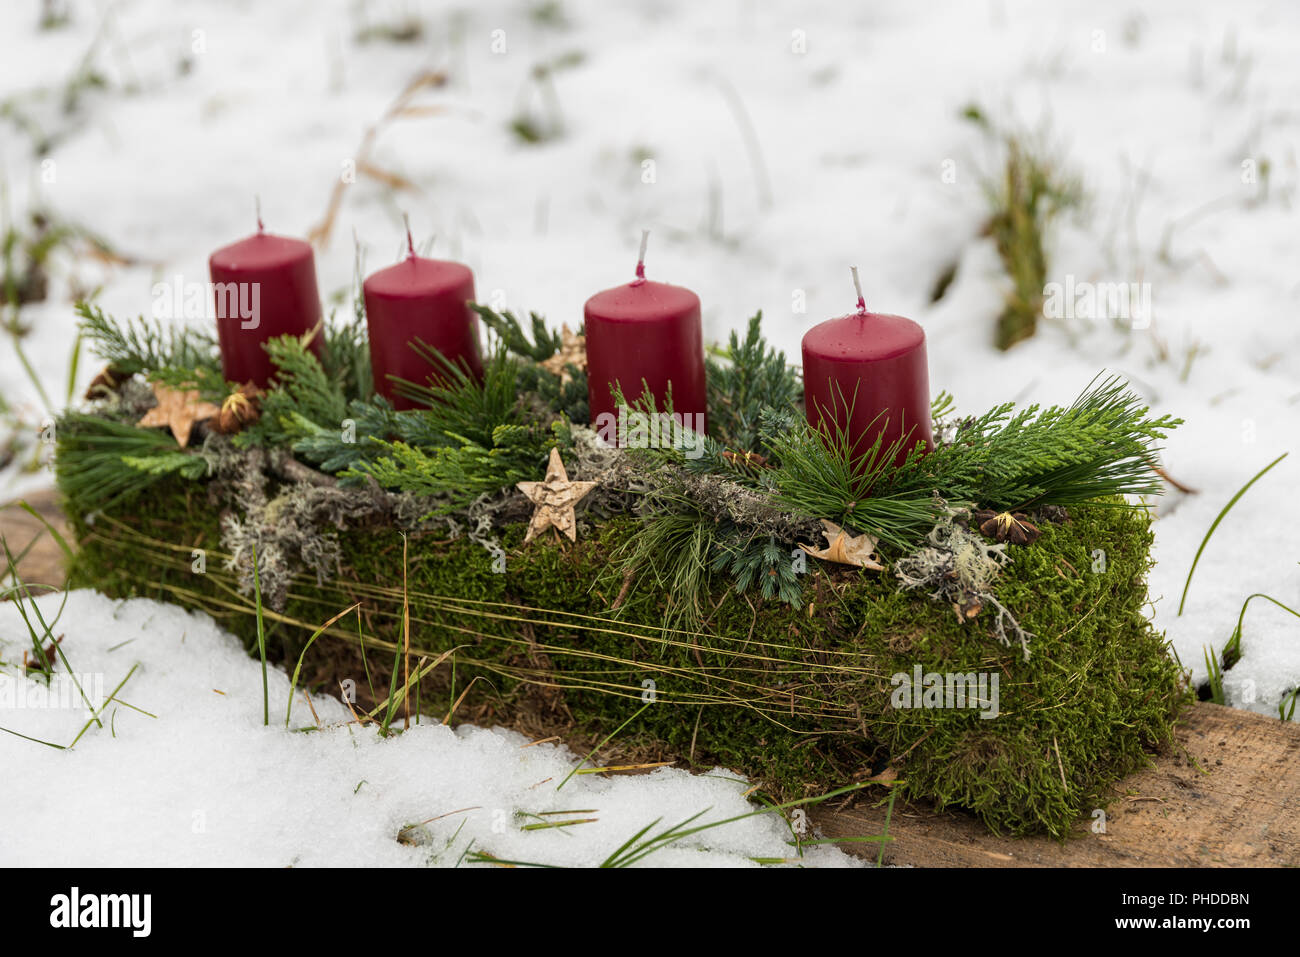 rustic Advent wreath in oblong shape stands in the snow Stock Photo